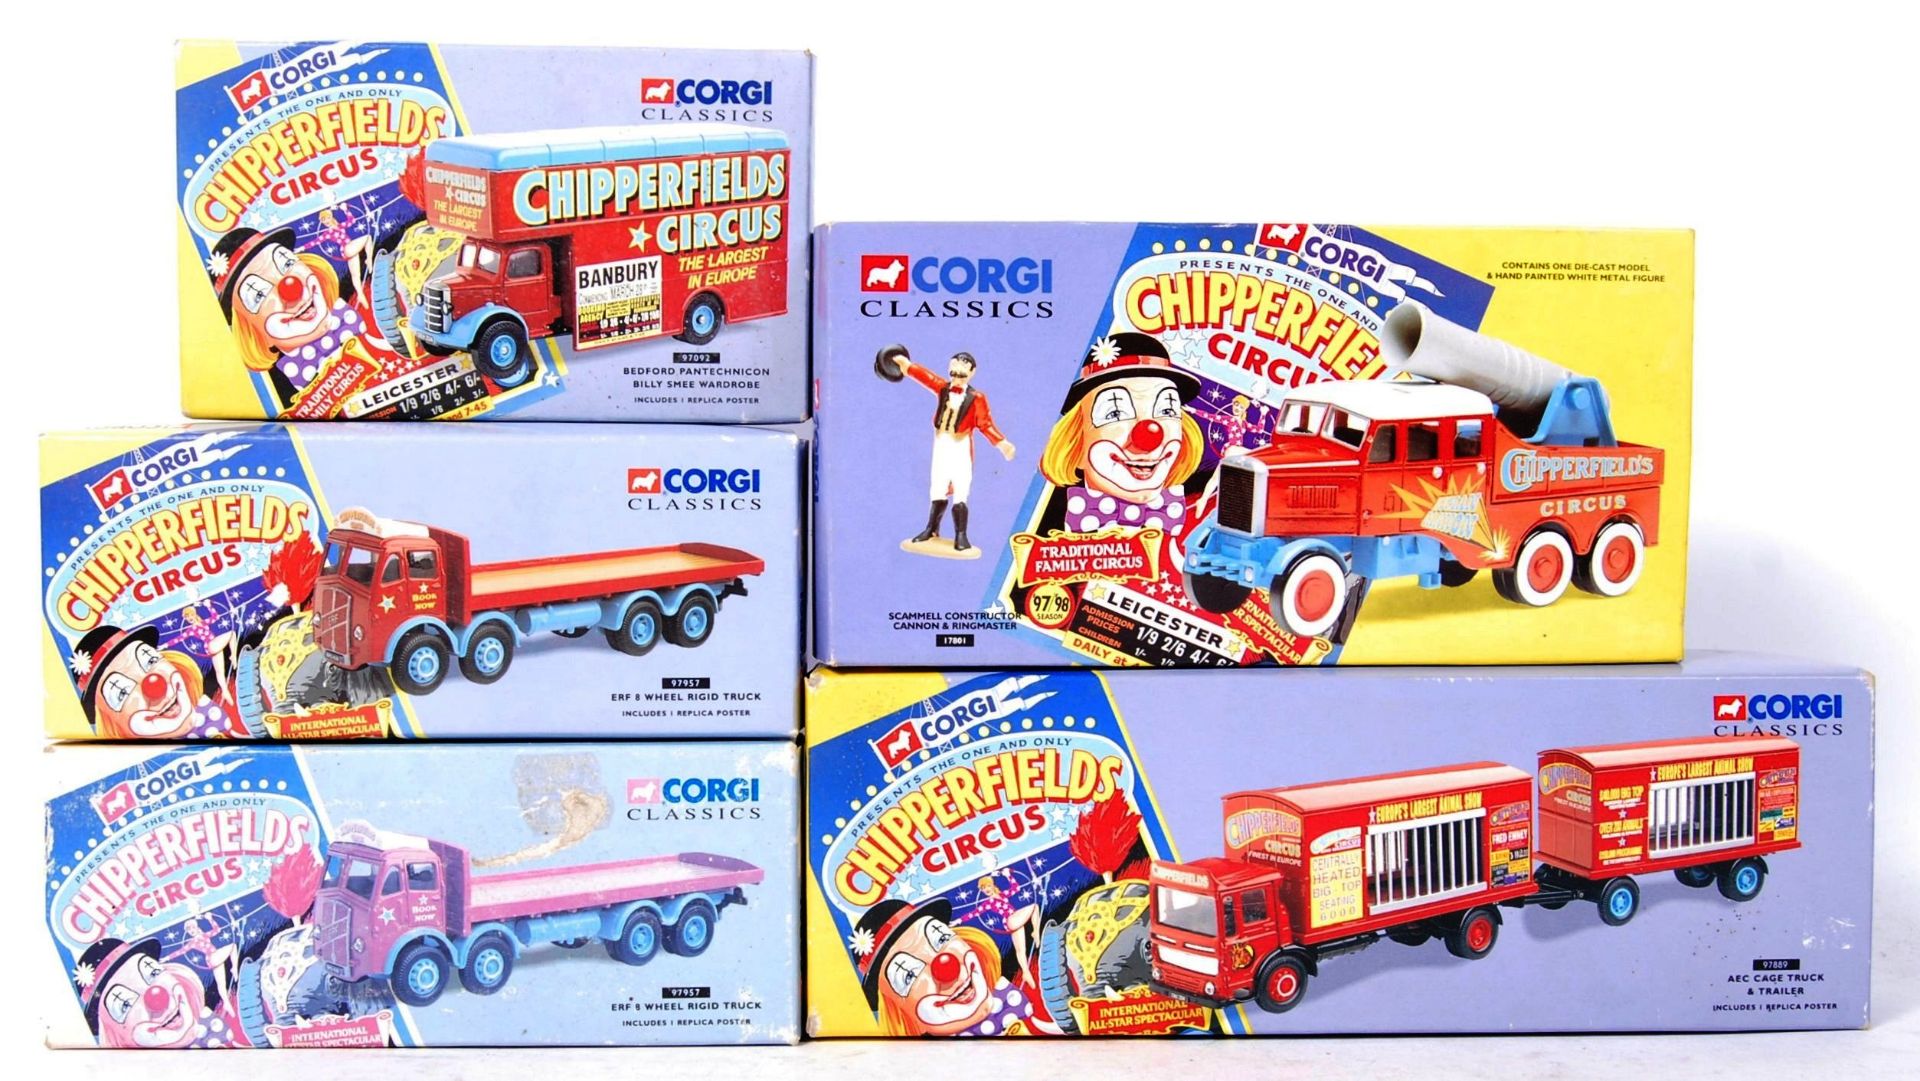 COLLECTION OF CORGI CHIPPERFIELD'S CIRCUS DIECAST MODEL SETS